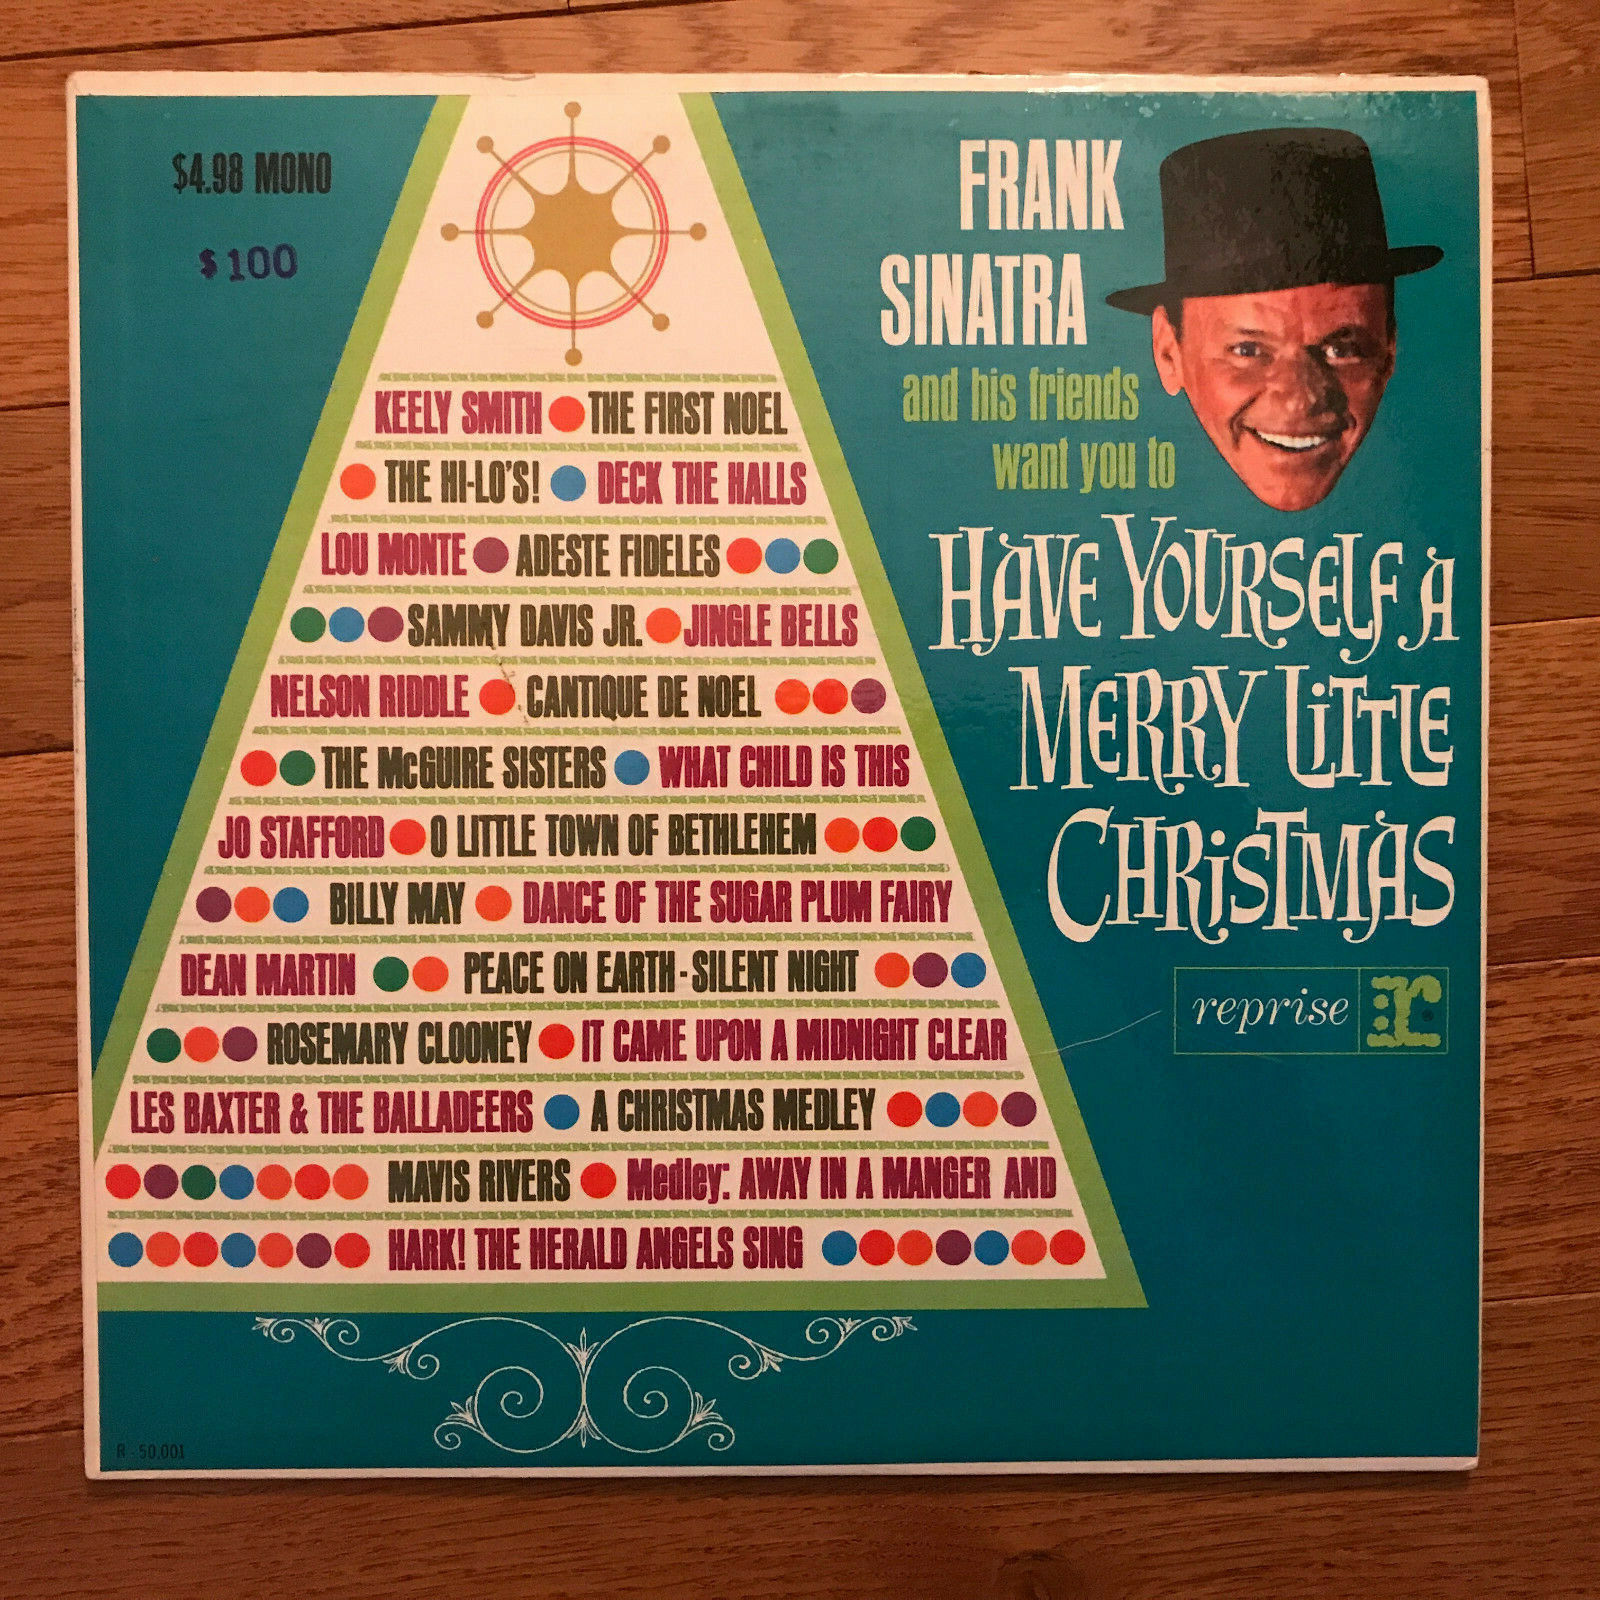 Frank Sinatra - Have Yourself a Merry Little Christmas LP Reprise 1963 Press VG+